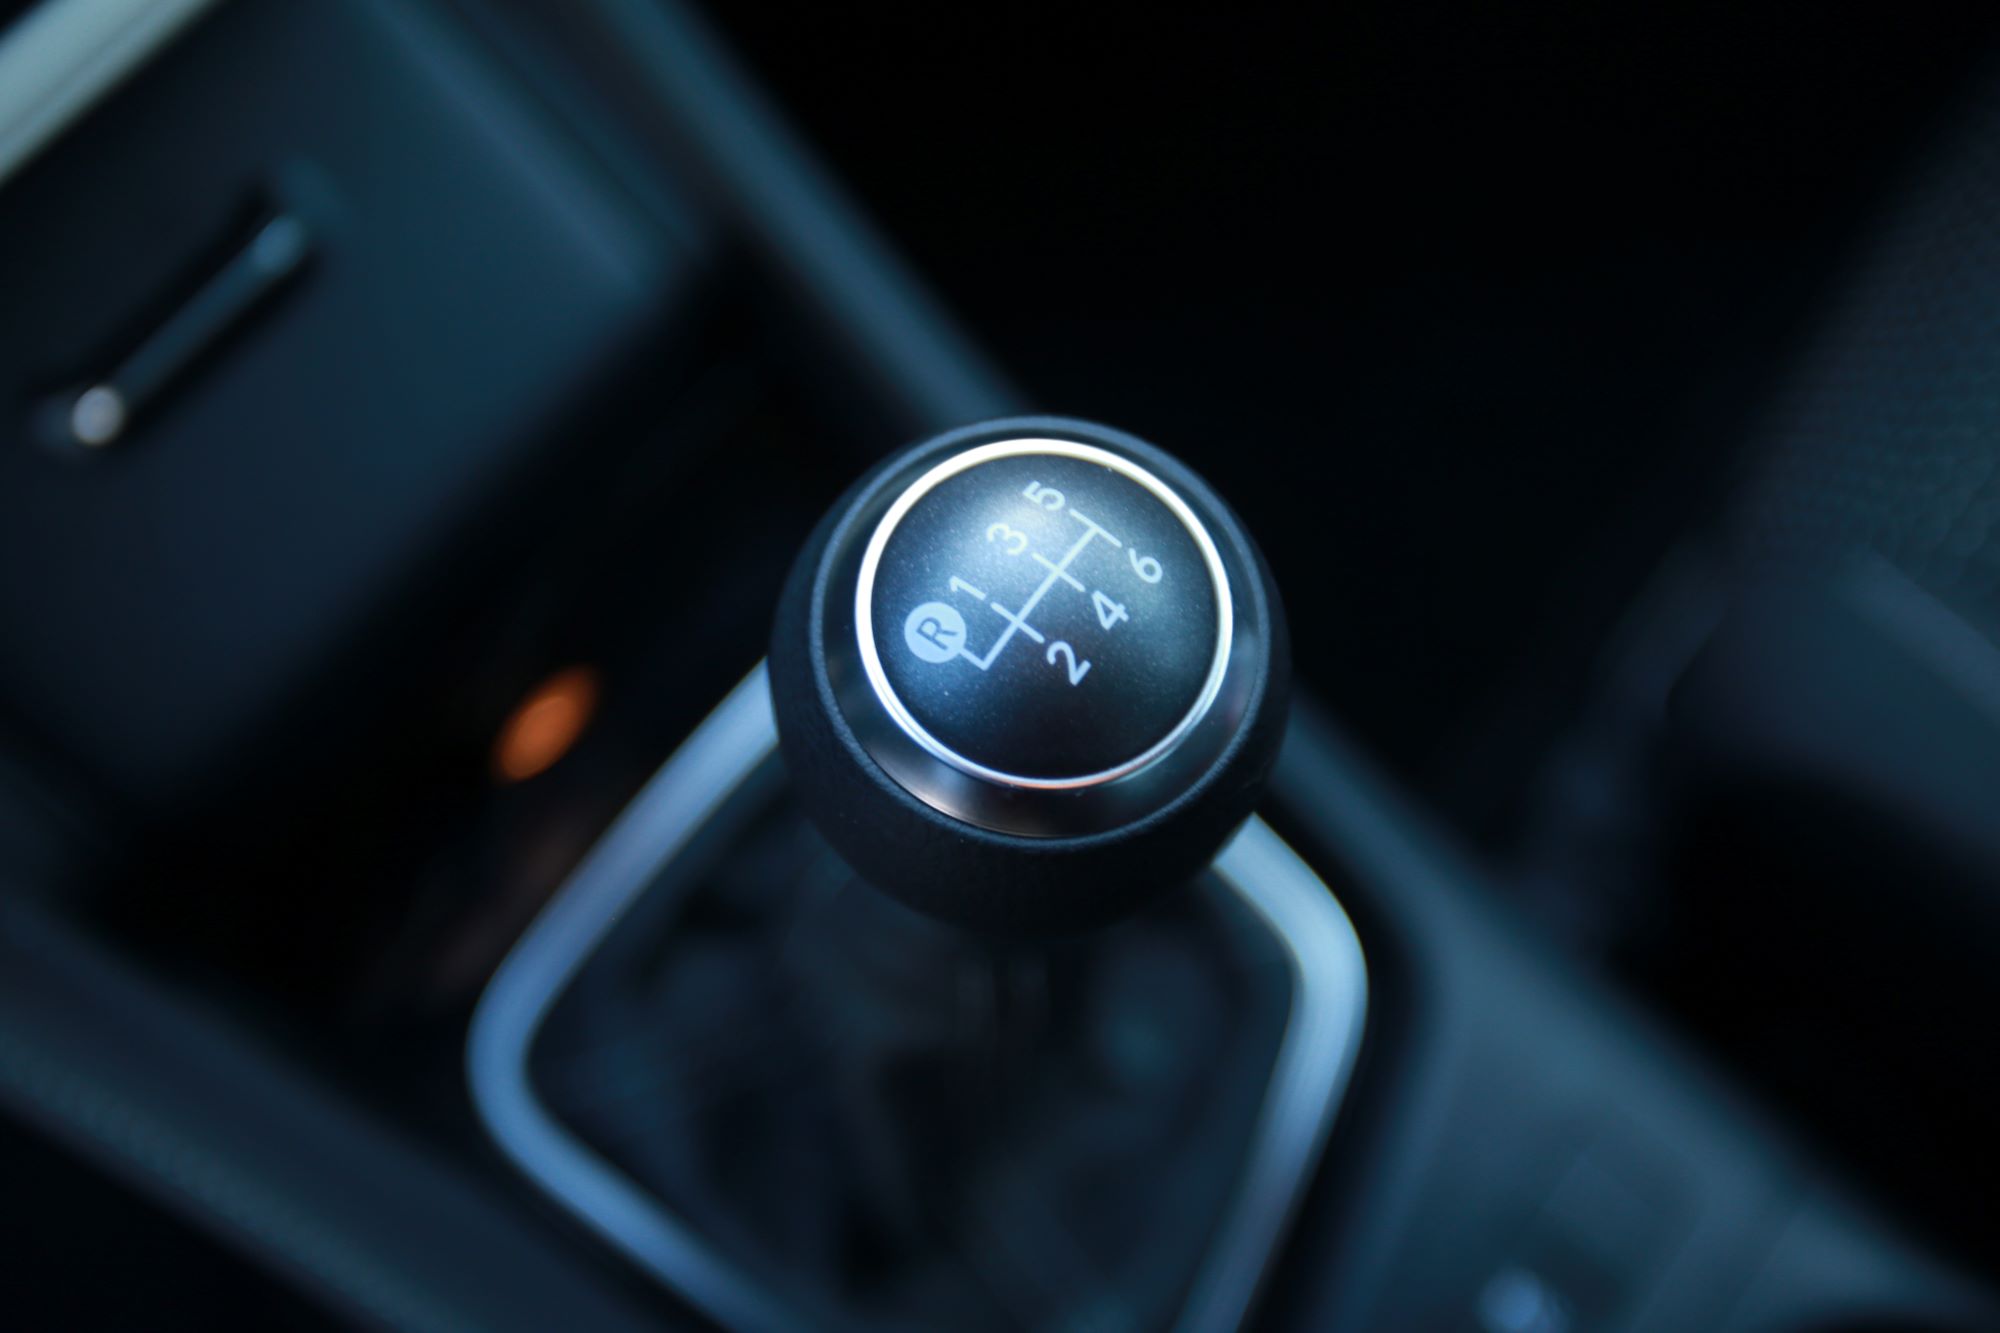 A six-speed manual transmission shifter gear select inside a vehicle with black interior